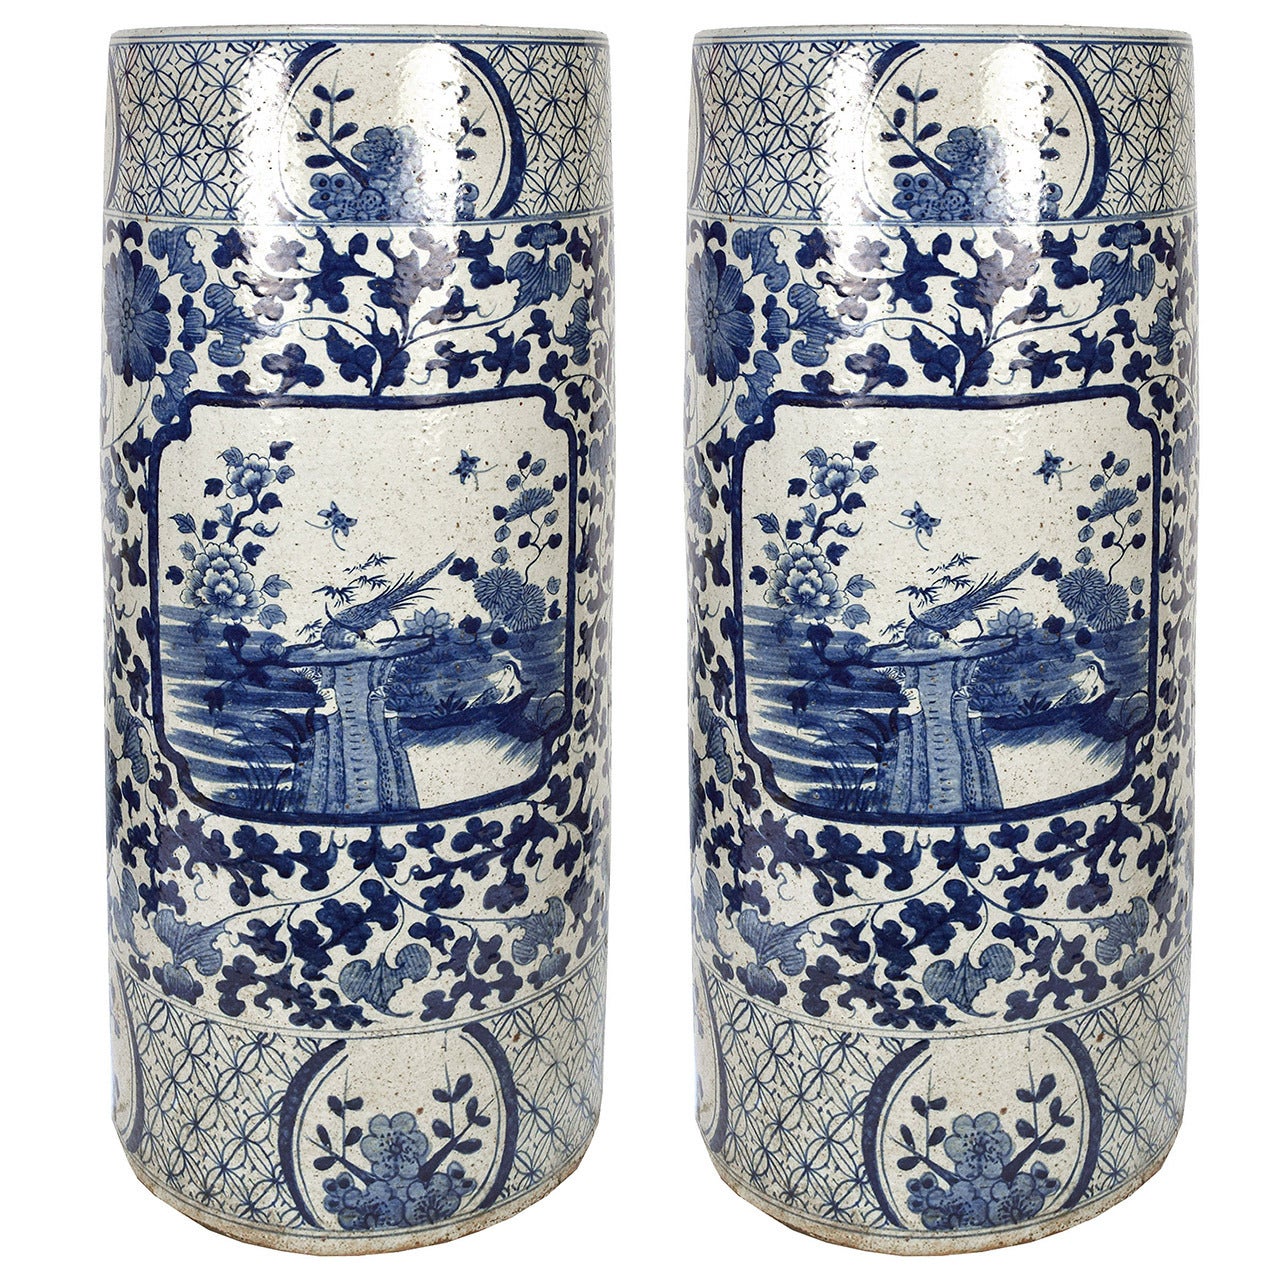 Chinese Blue and White Umbrella Containers